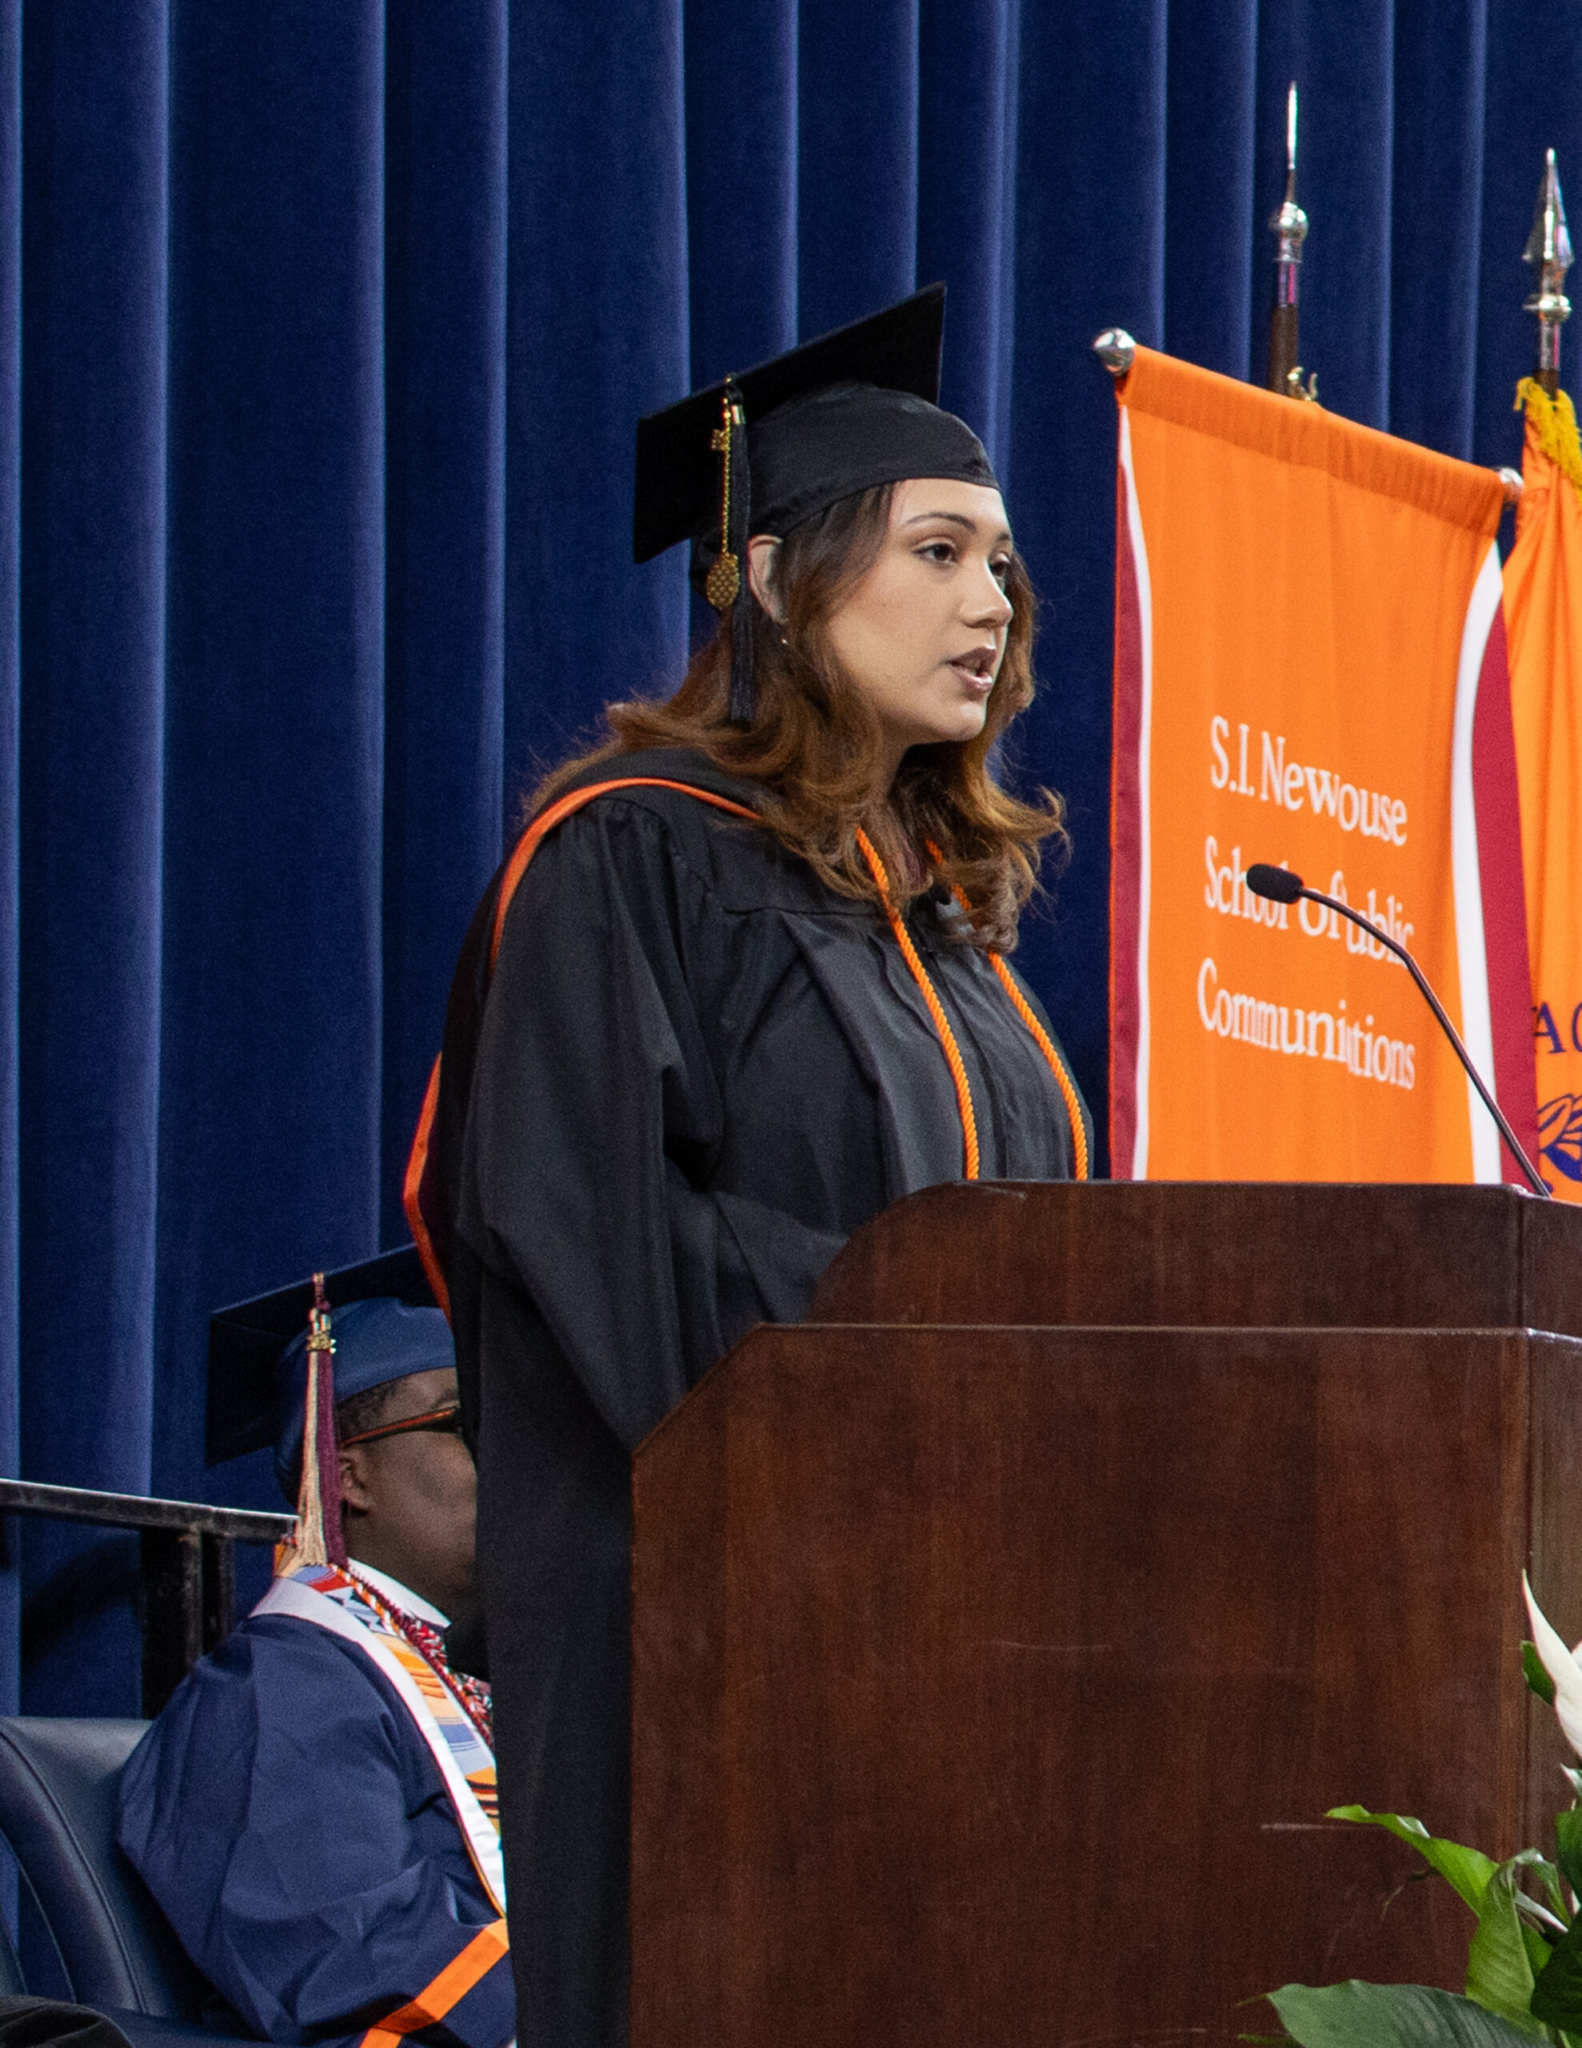 a person in a graduation cap and gown speaks at a podium